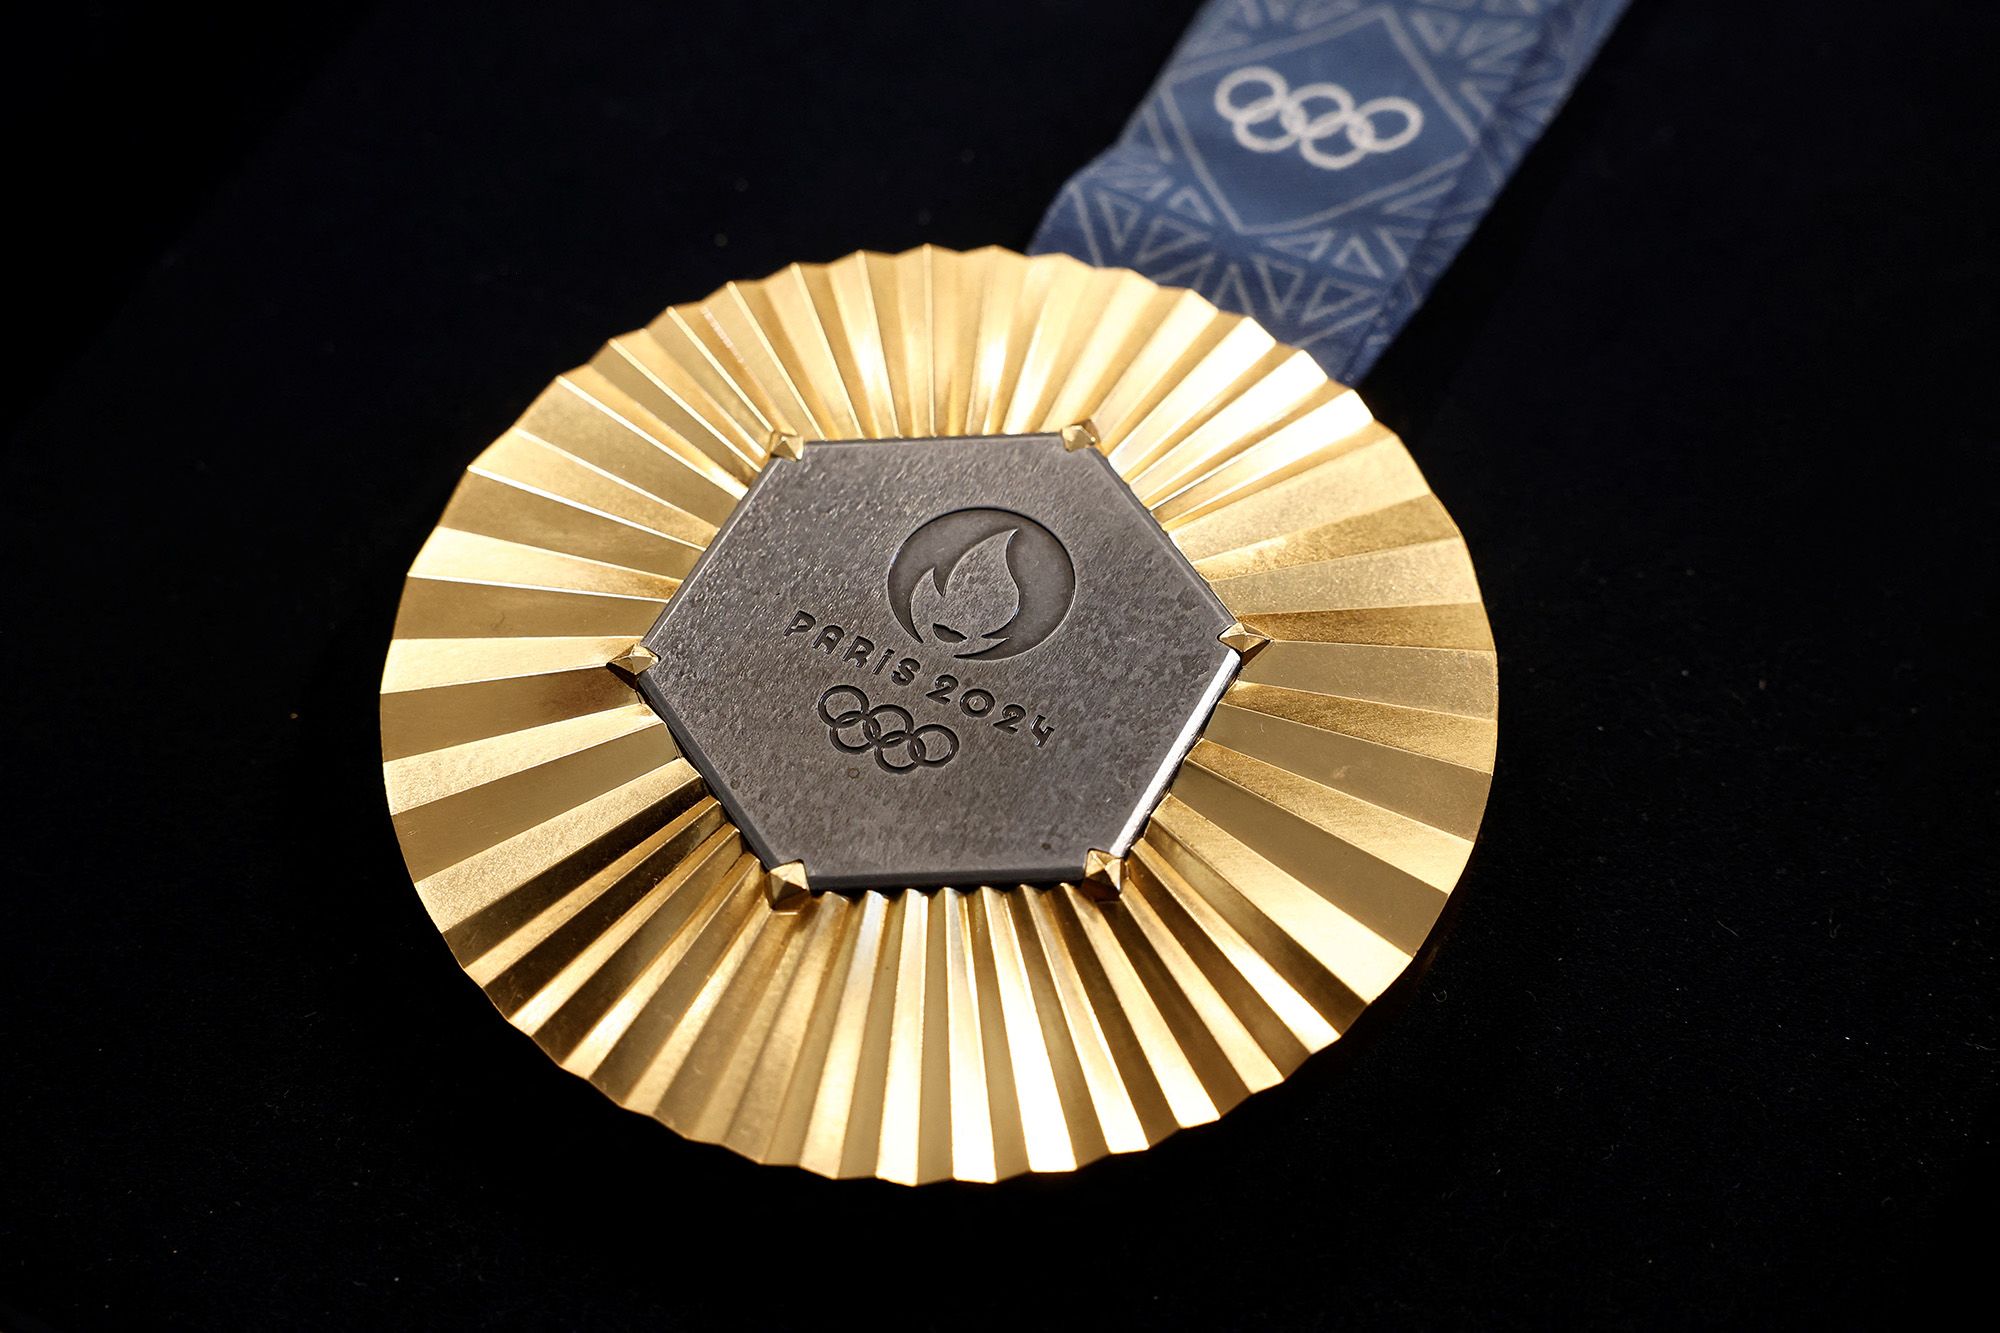 A gold medal featuring iron from the iconic Eiffel Tower, designed by jeweller Chaumet. The medals will be awarded at the upcoming Paris 2024 Olympic Games.